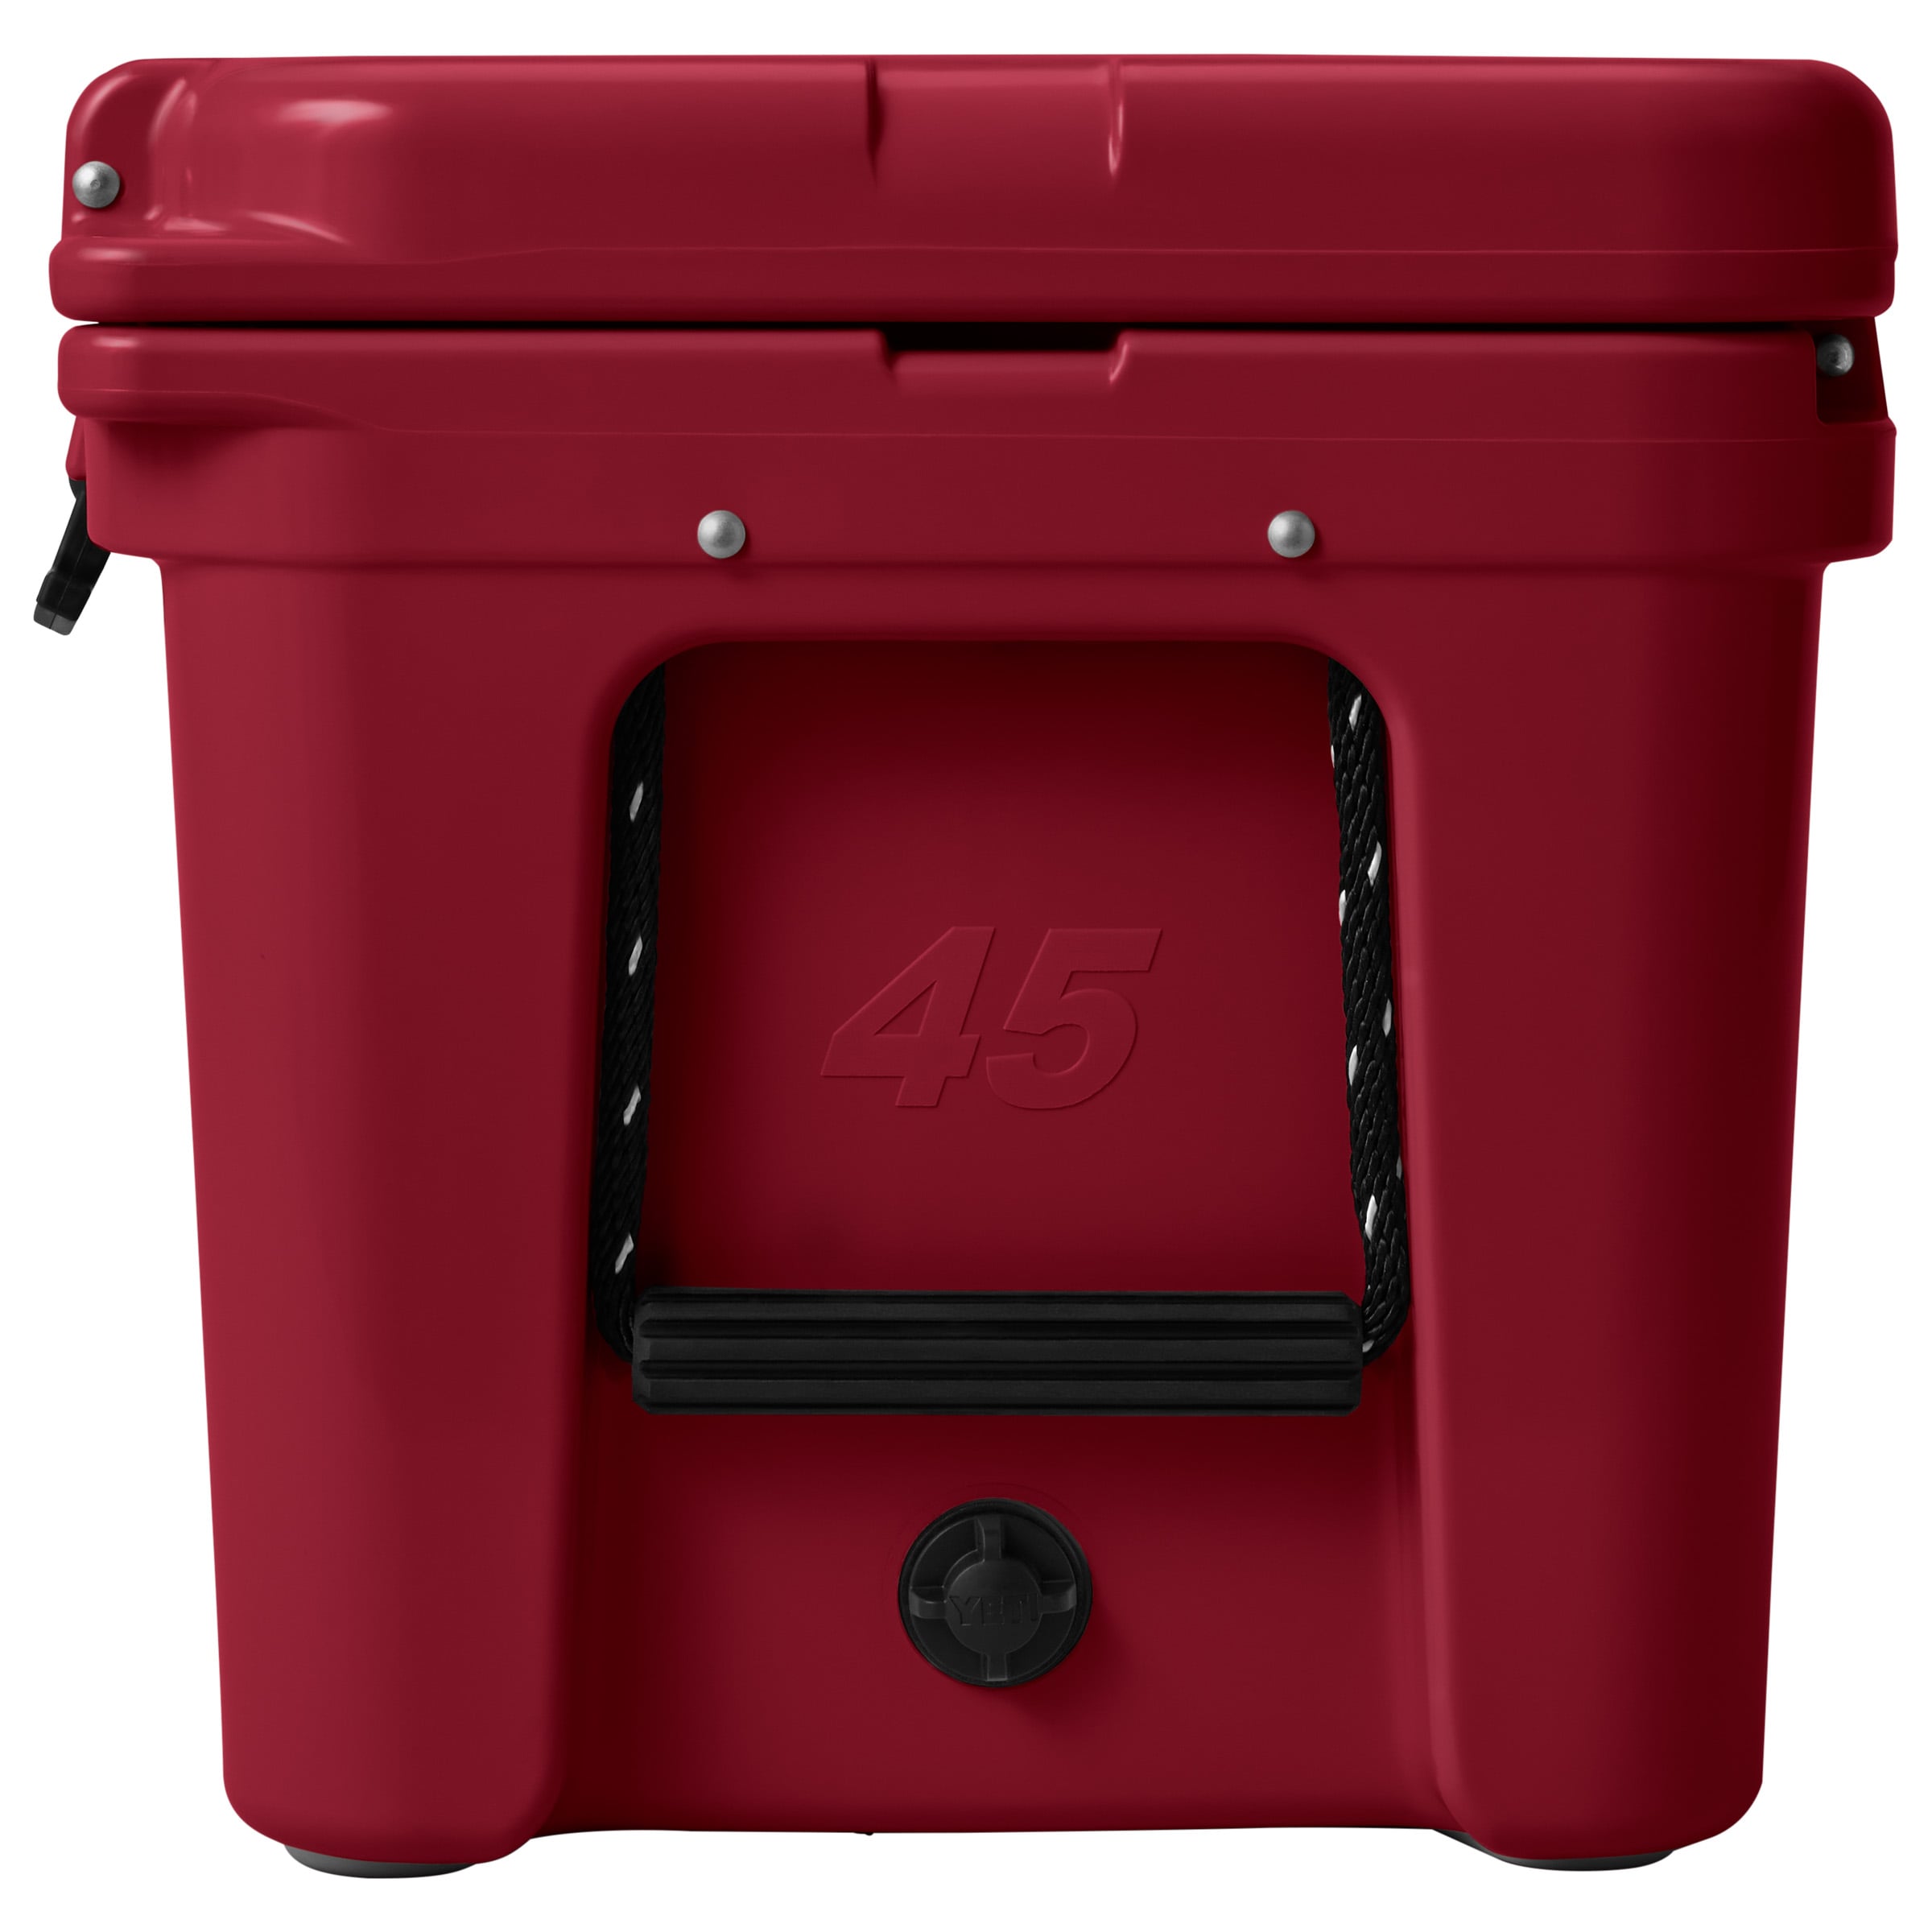 YETI Tundra 45 Cooler - Harvest Red - New with tags - Limited/Retired color